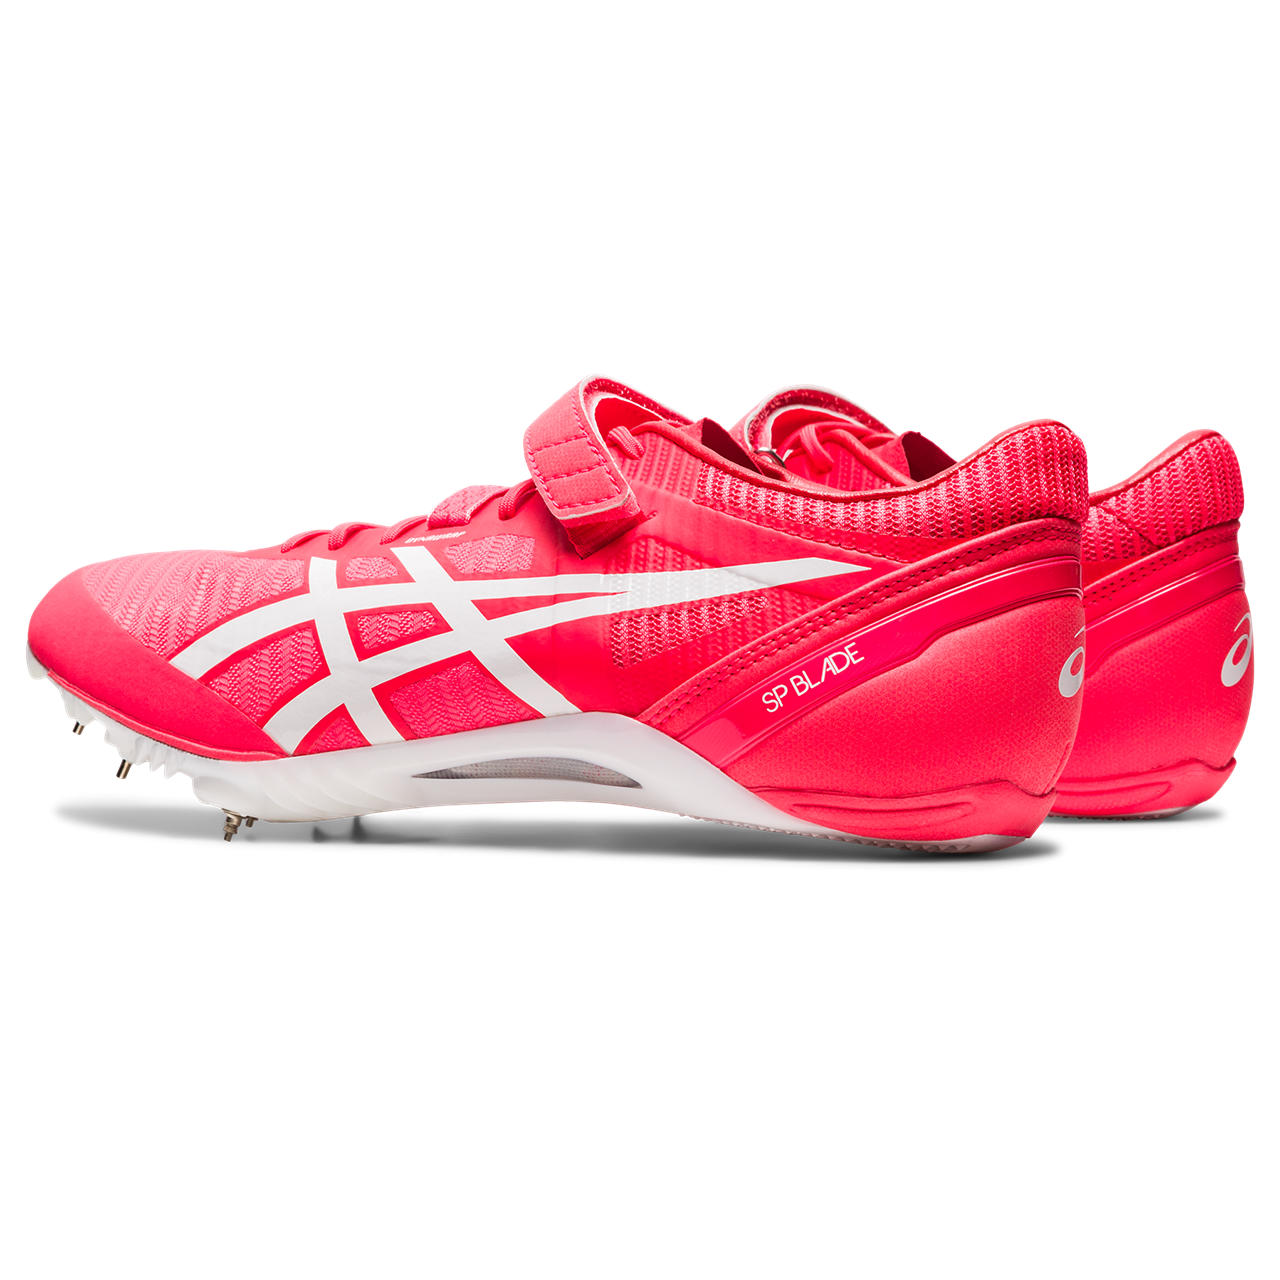 ASICS SP BLADE 9 image number null